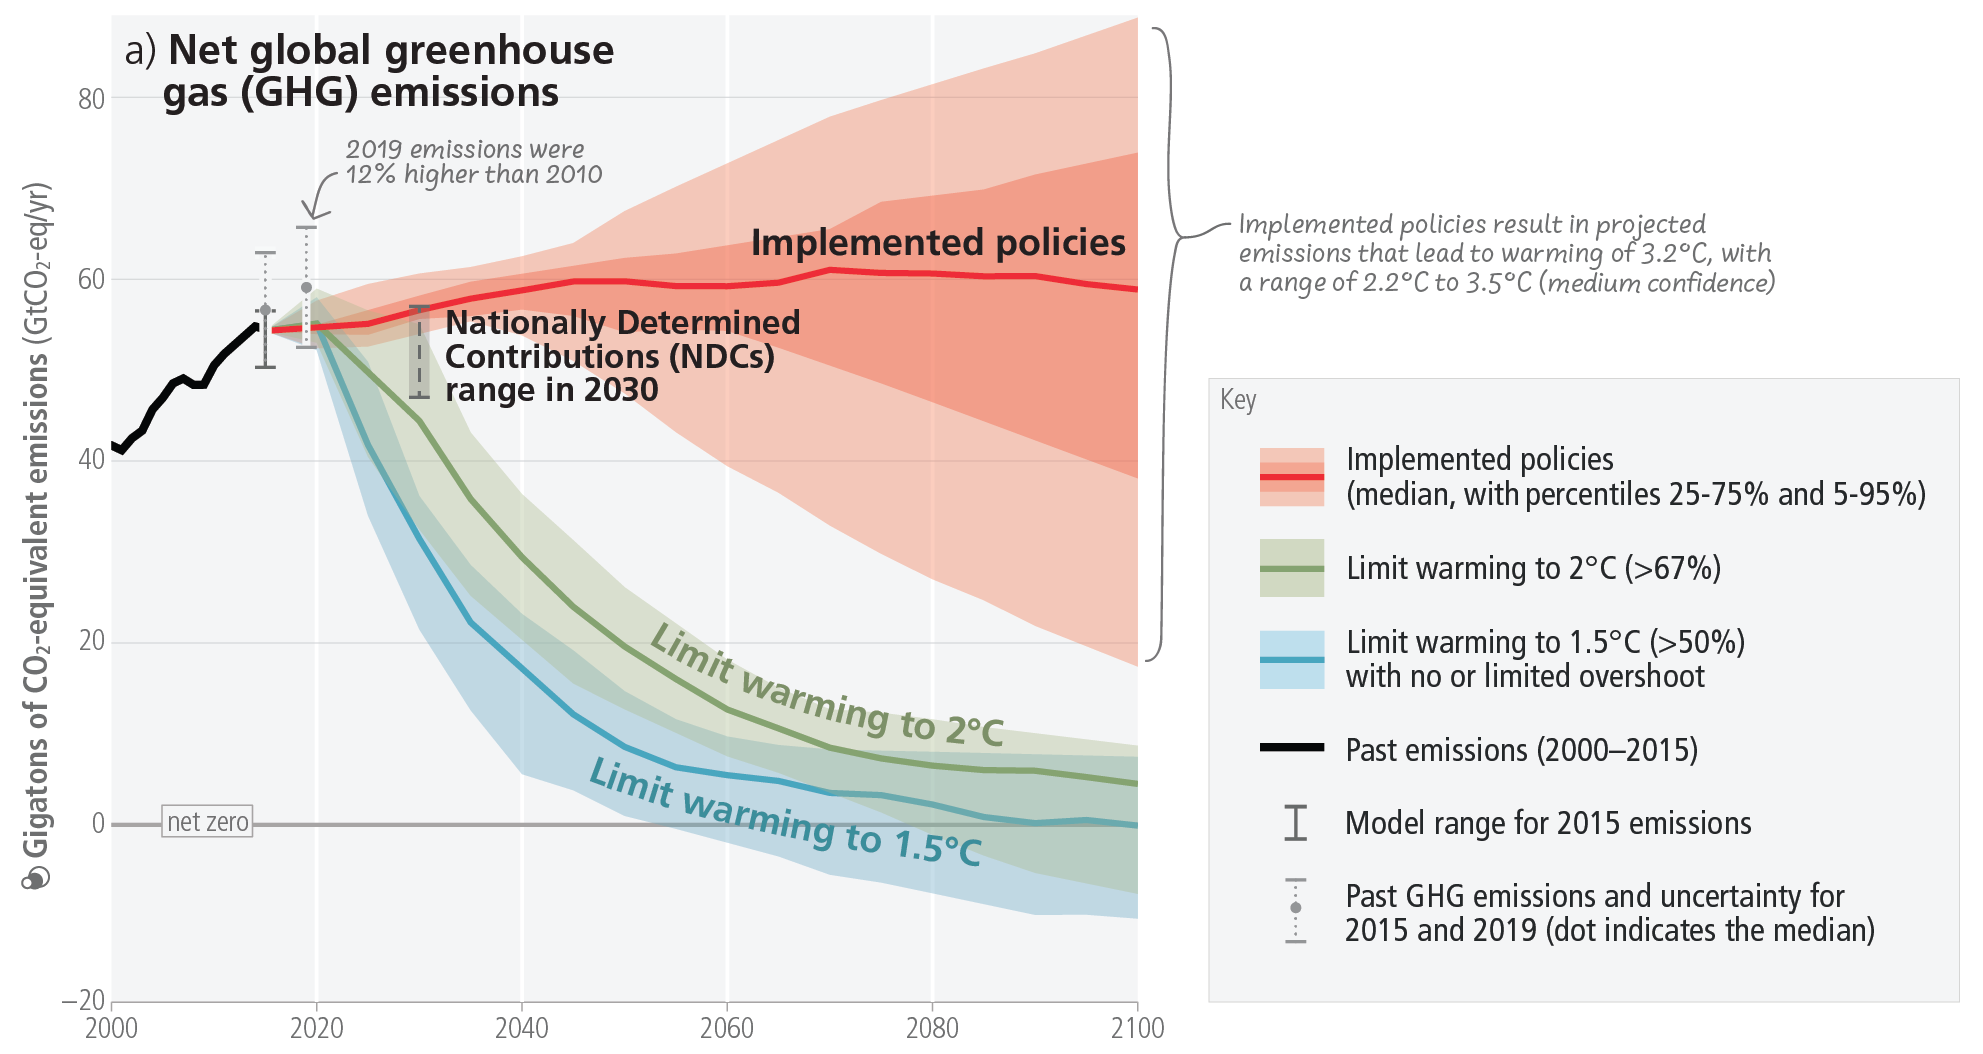 A line graph, showing past CO2 emissions and projections for future emissions under different scenarios including implemented policies and temperature limitations.